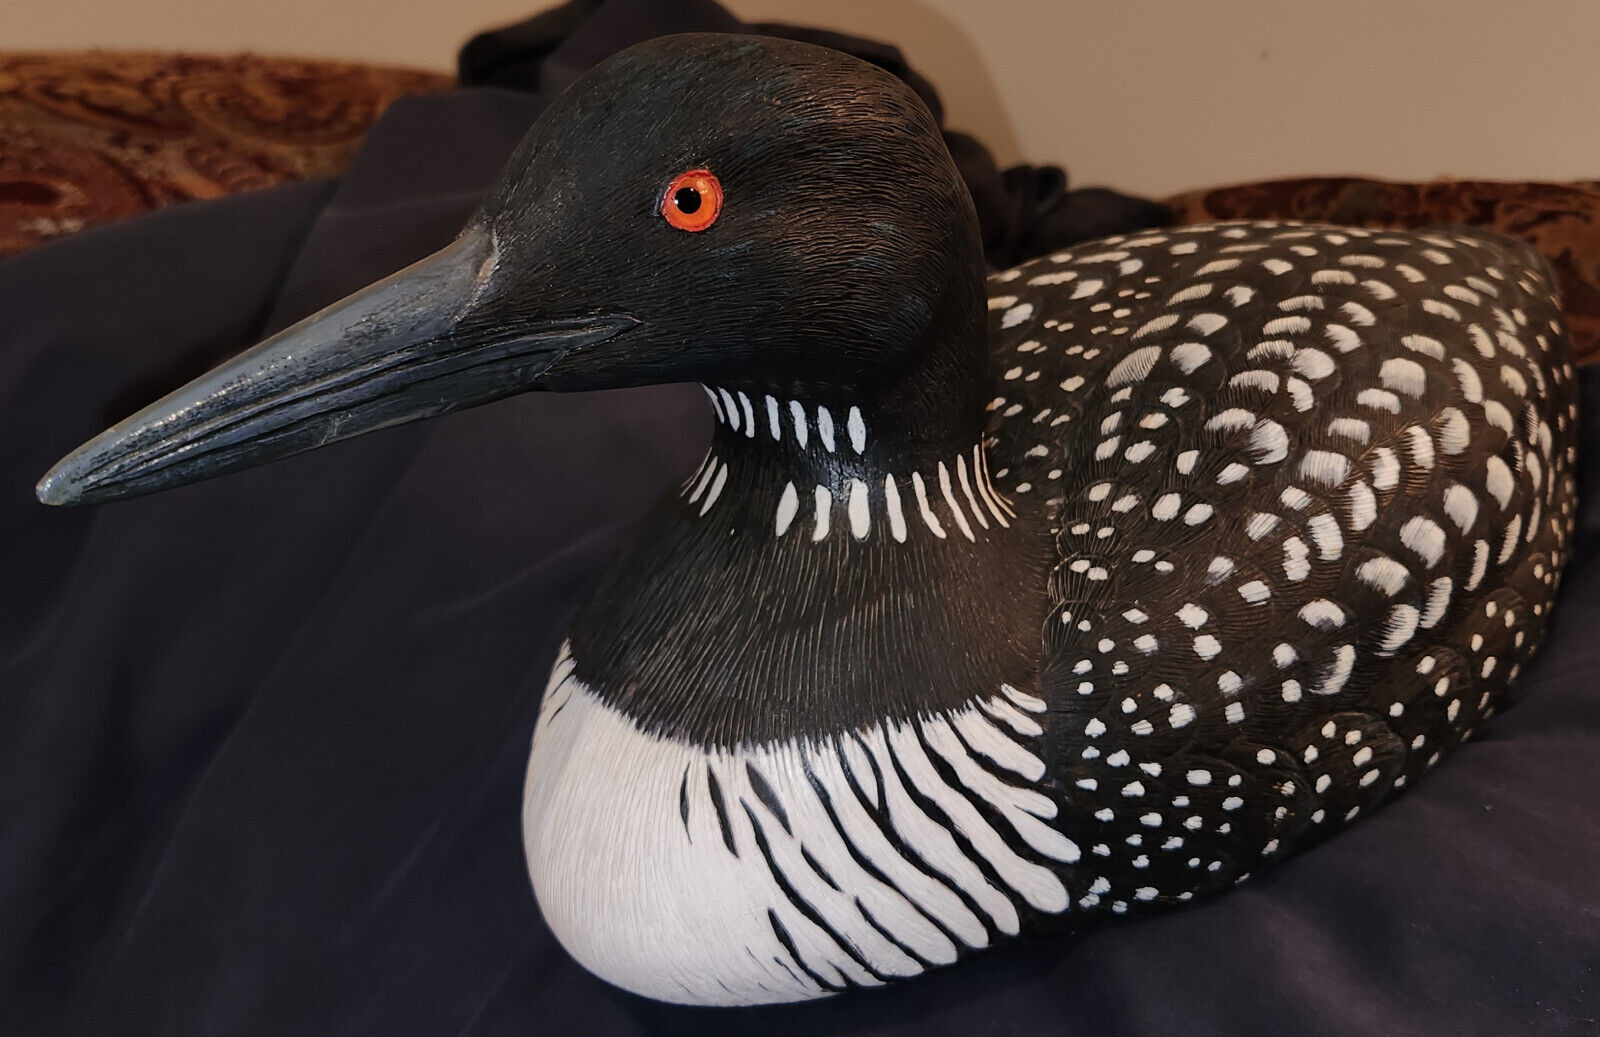 Signed Wood Carved Common Loon-1990 by Stu Armstrong-Exemplary work by a Master.